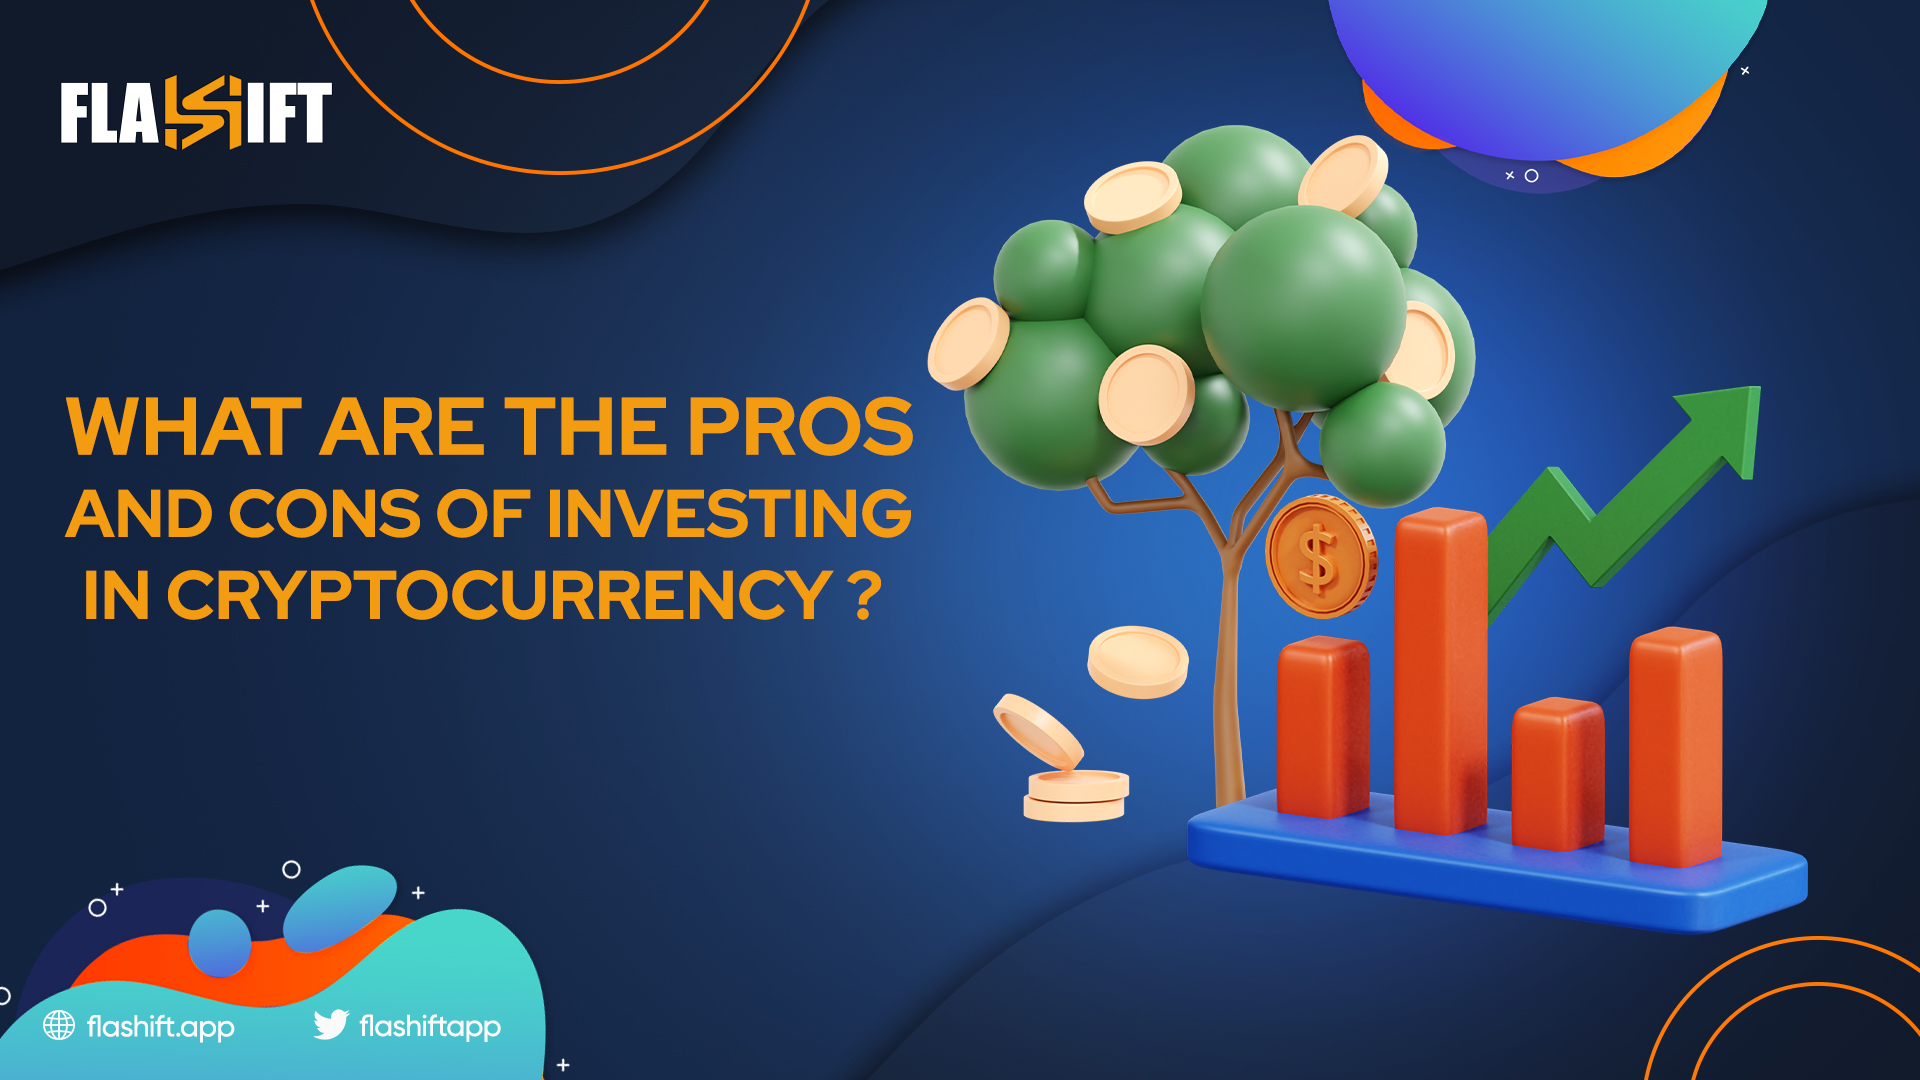 What are the advantages and disadvantages of investing in cryptocurrencies?